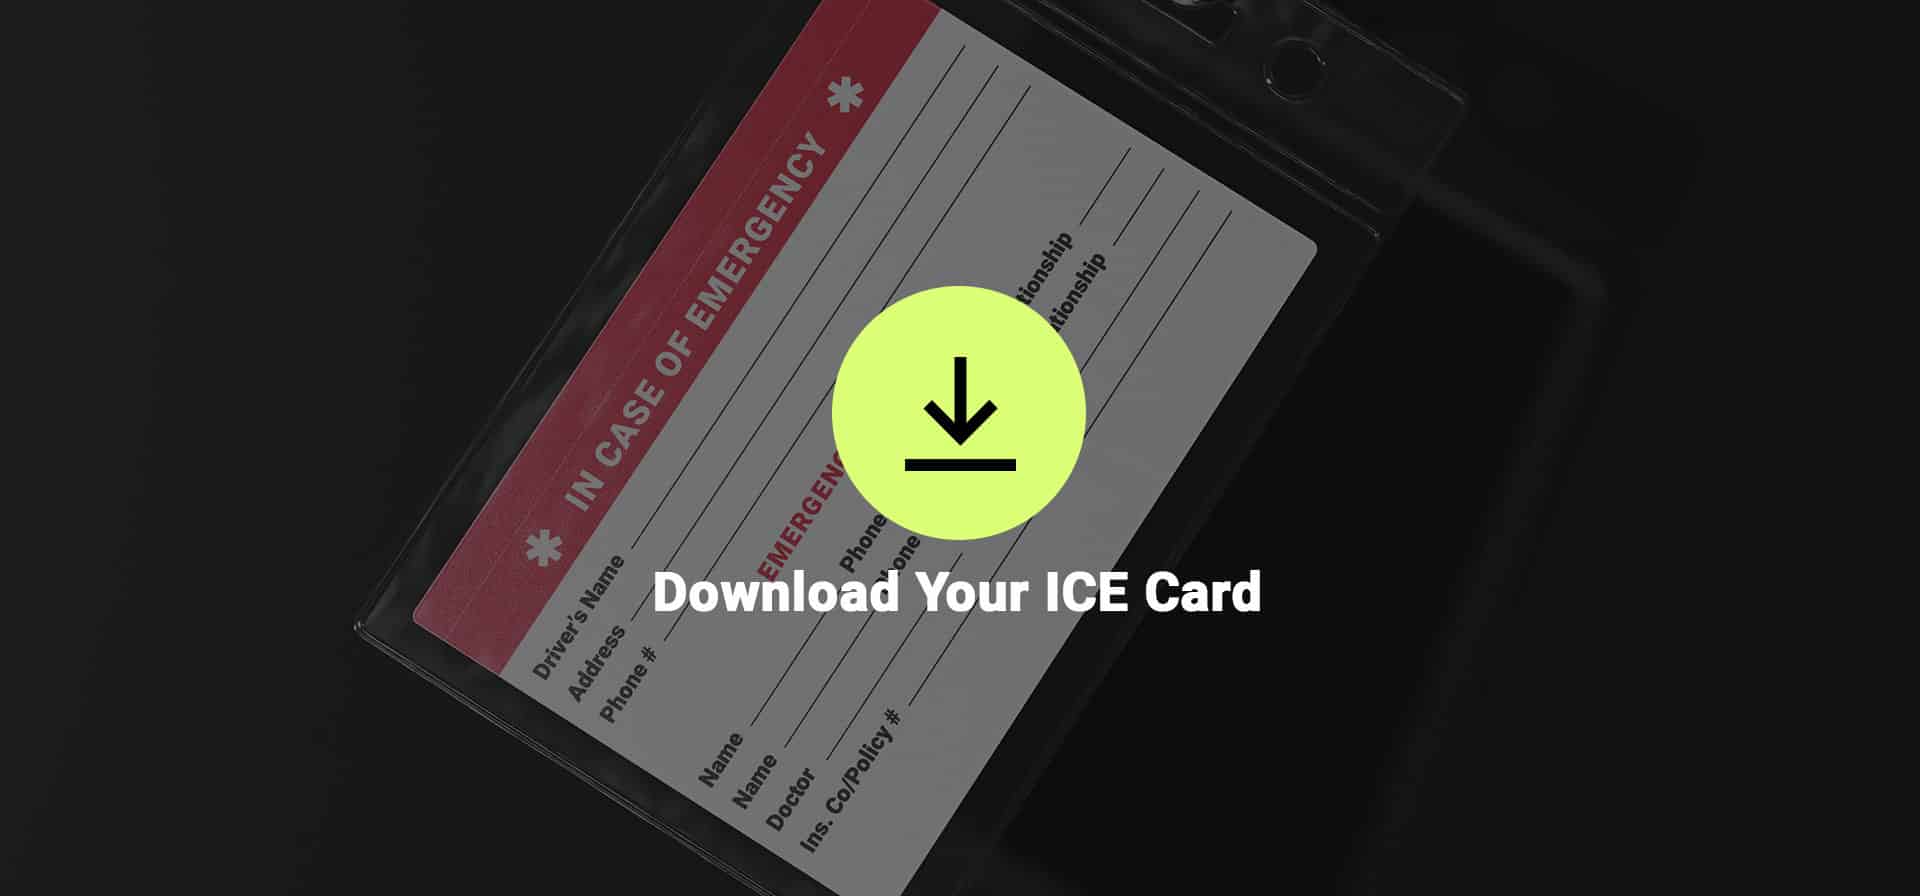 Sample ICE card with button to click that says Download Your ICE Card. Clicking the button will allow you to safely download your own ICE card to print and fill out.